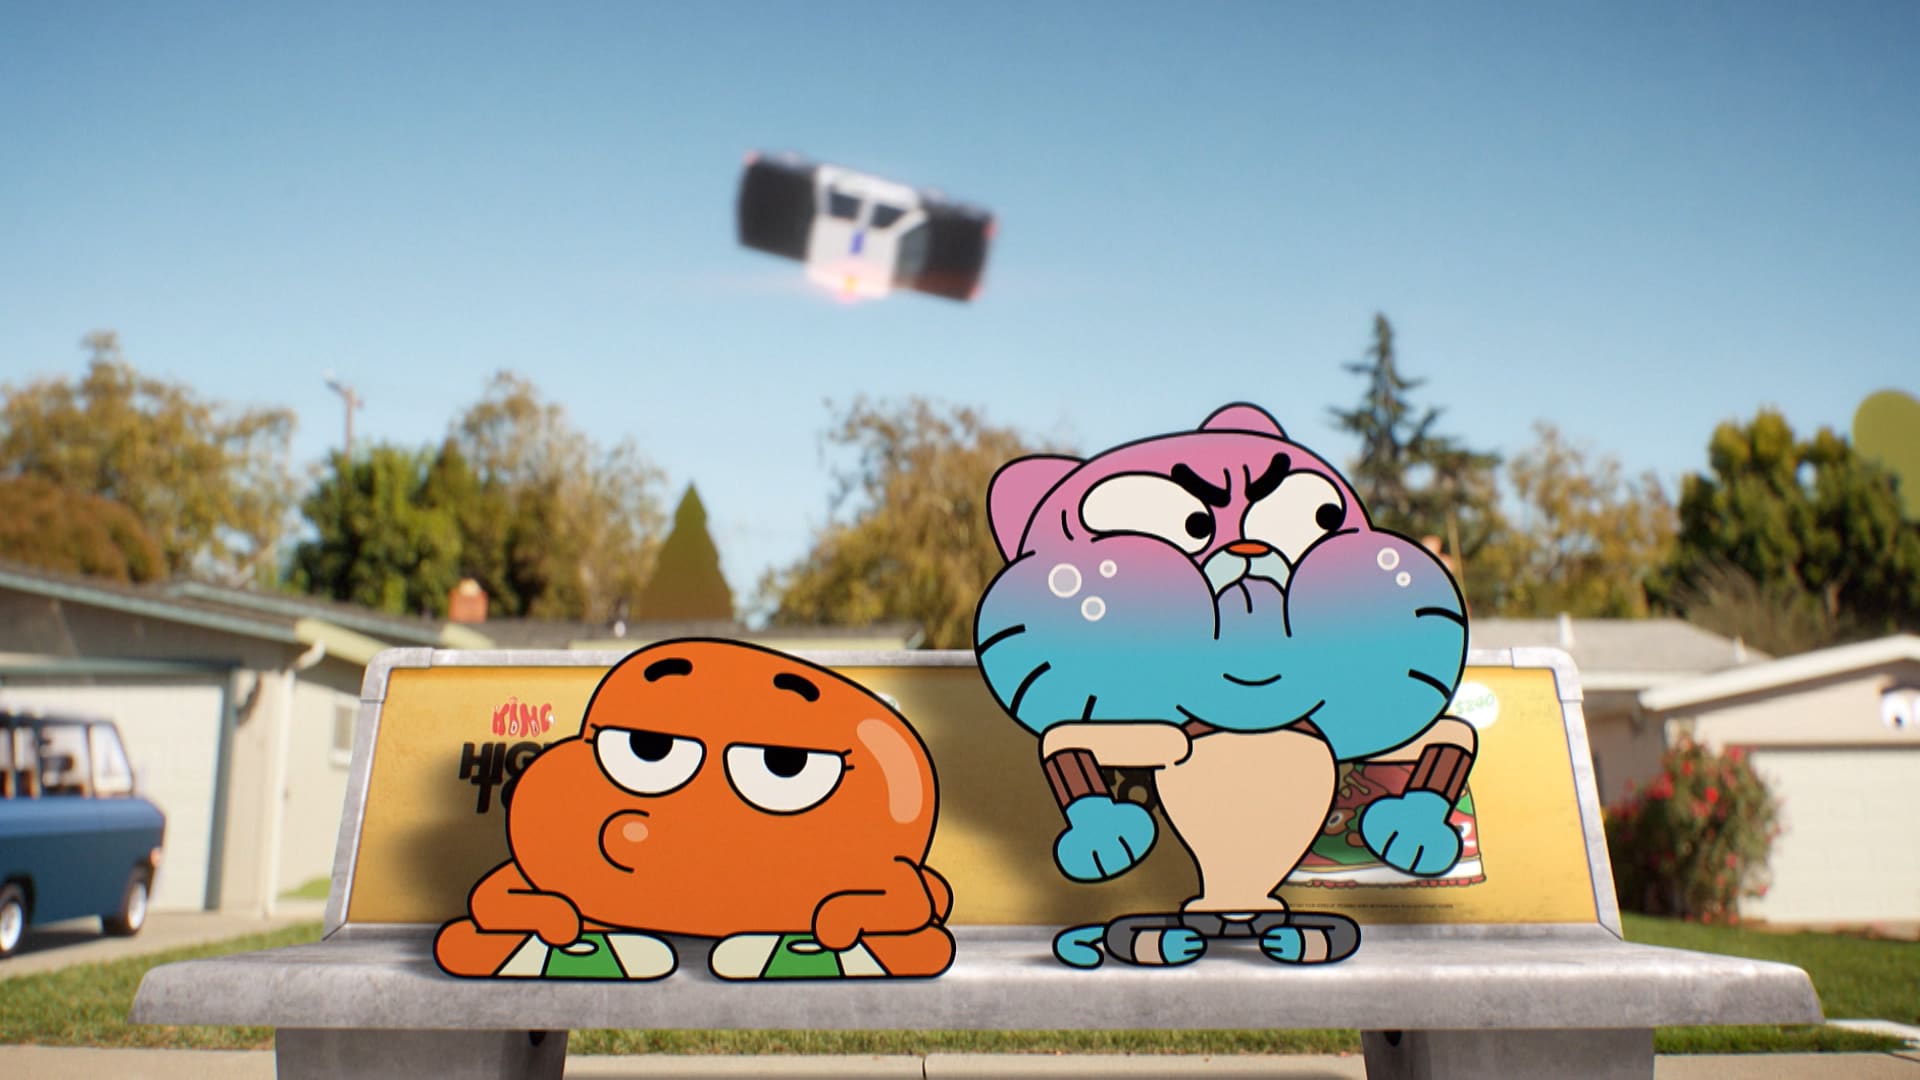 The Amazing World of Gumball, Travel the World Online With Gumball